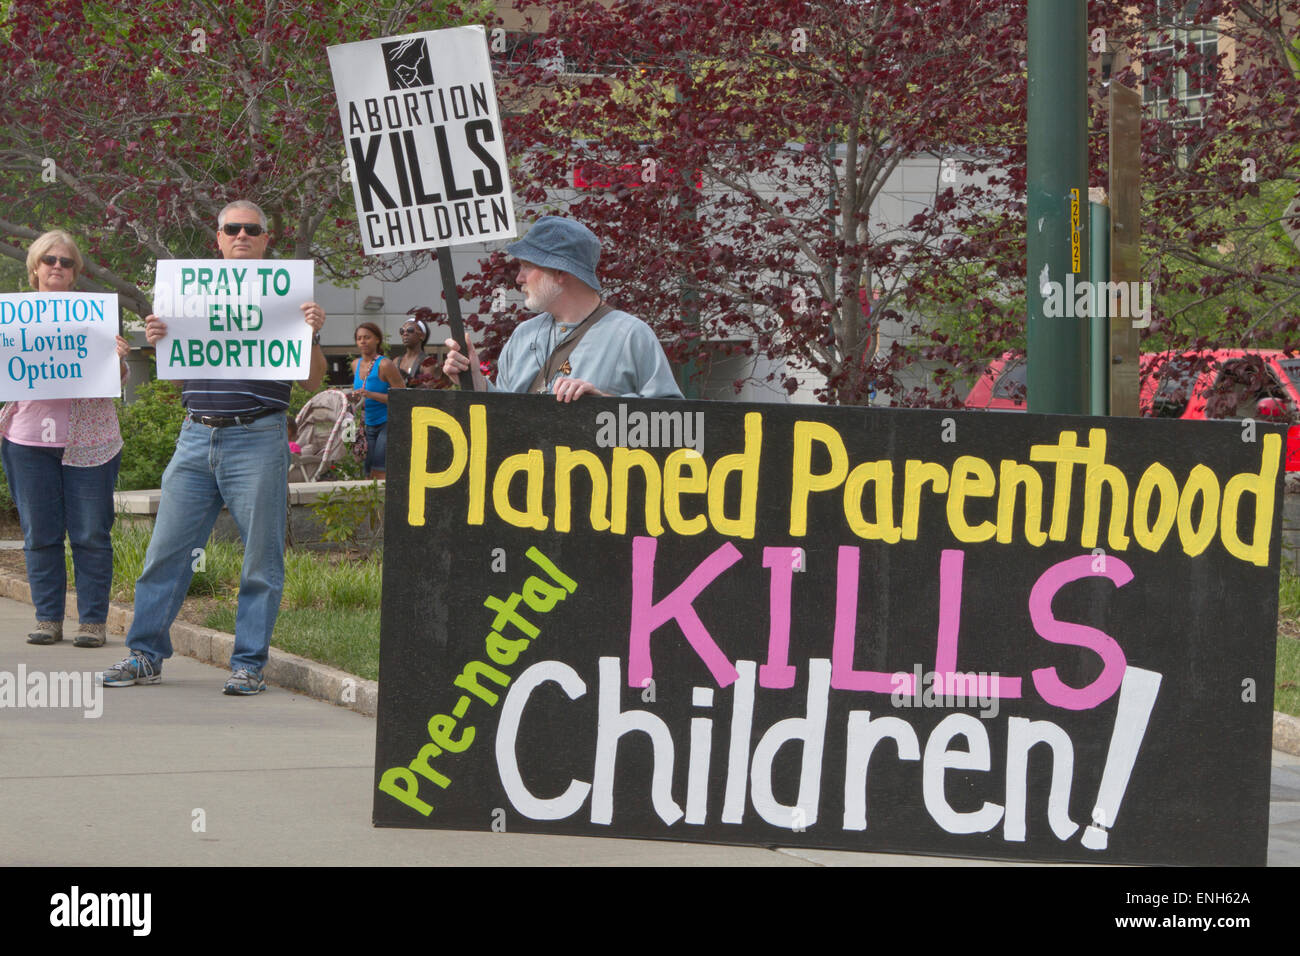 Asheville, North Carolina, USA - May 4, 2015:  Two men and one woman hold anti-abortion signs at a rally protesting North Carolina abortion bill #465 which requires a much longer waiting period for women seeking abortions on May 4, 2015 in downtown Asheville, NC Credit:  Judith Bicking/Alamy Live News Stock Photo